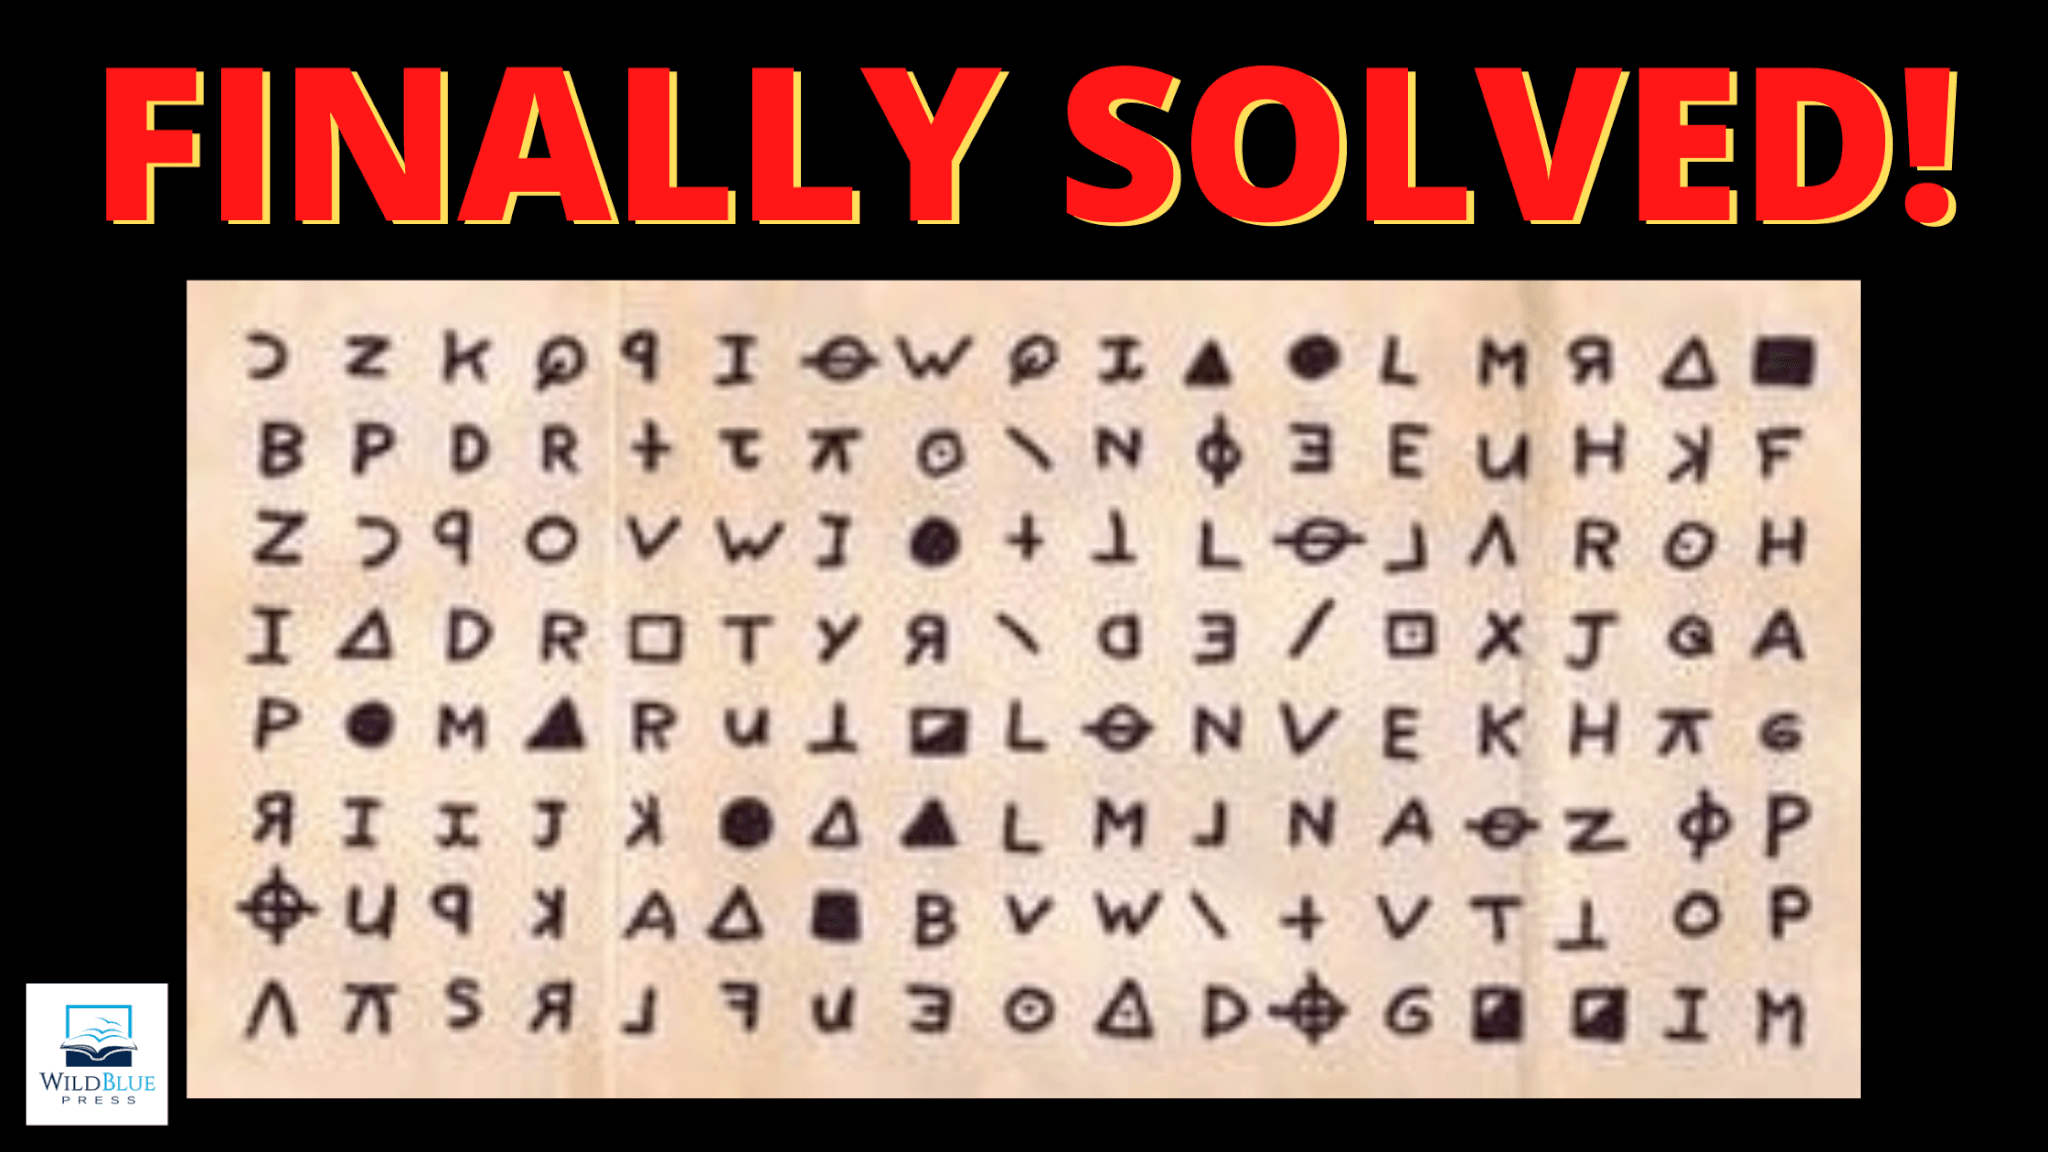 Zodiac Killer's '340 Cipher' Cracked After 51 Years • WildBlue Press